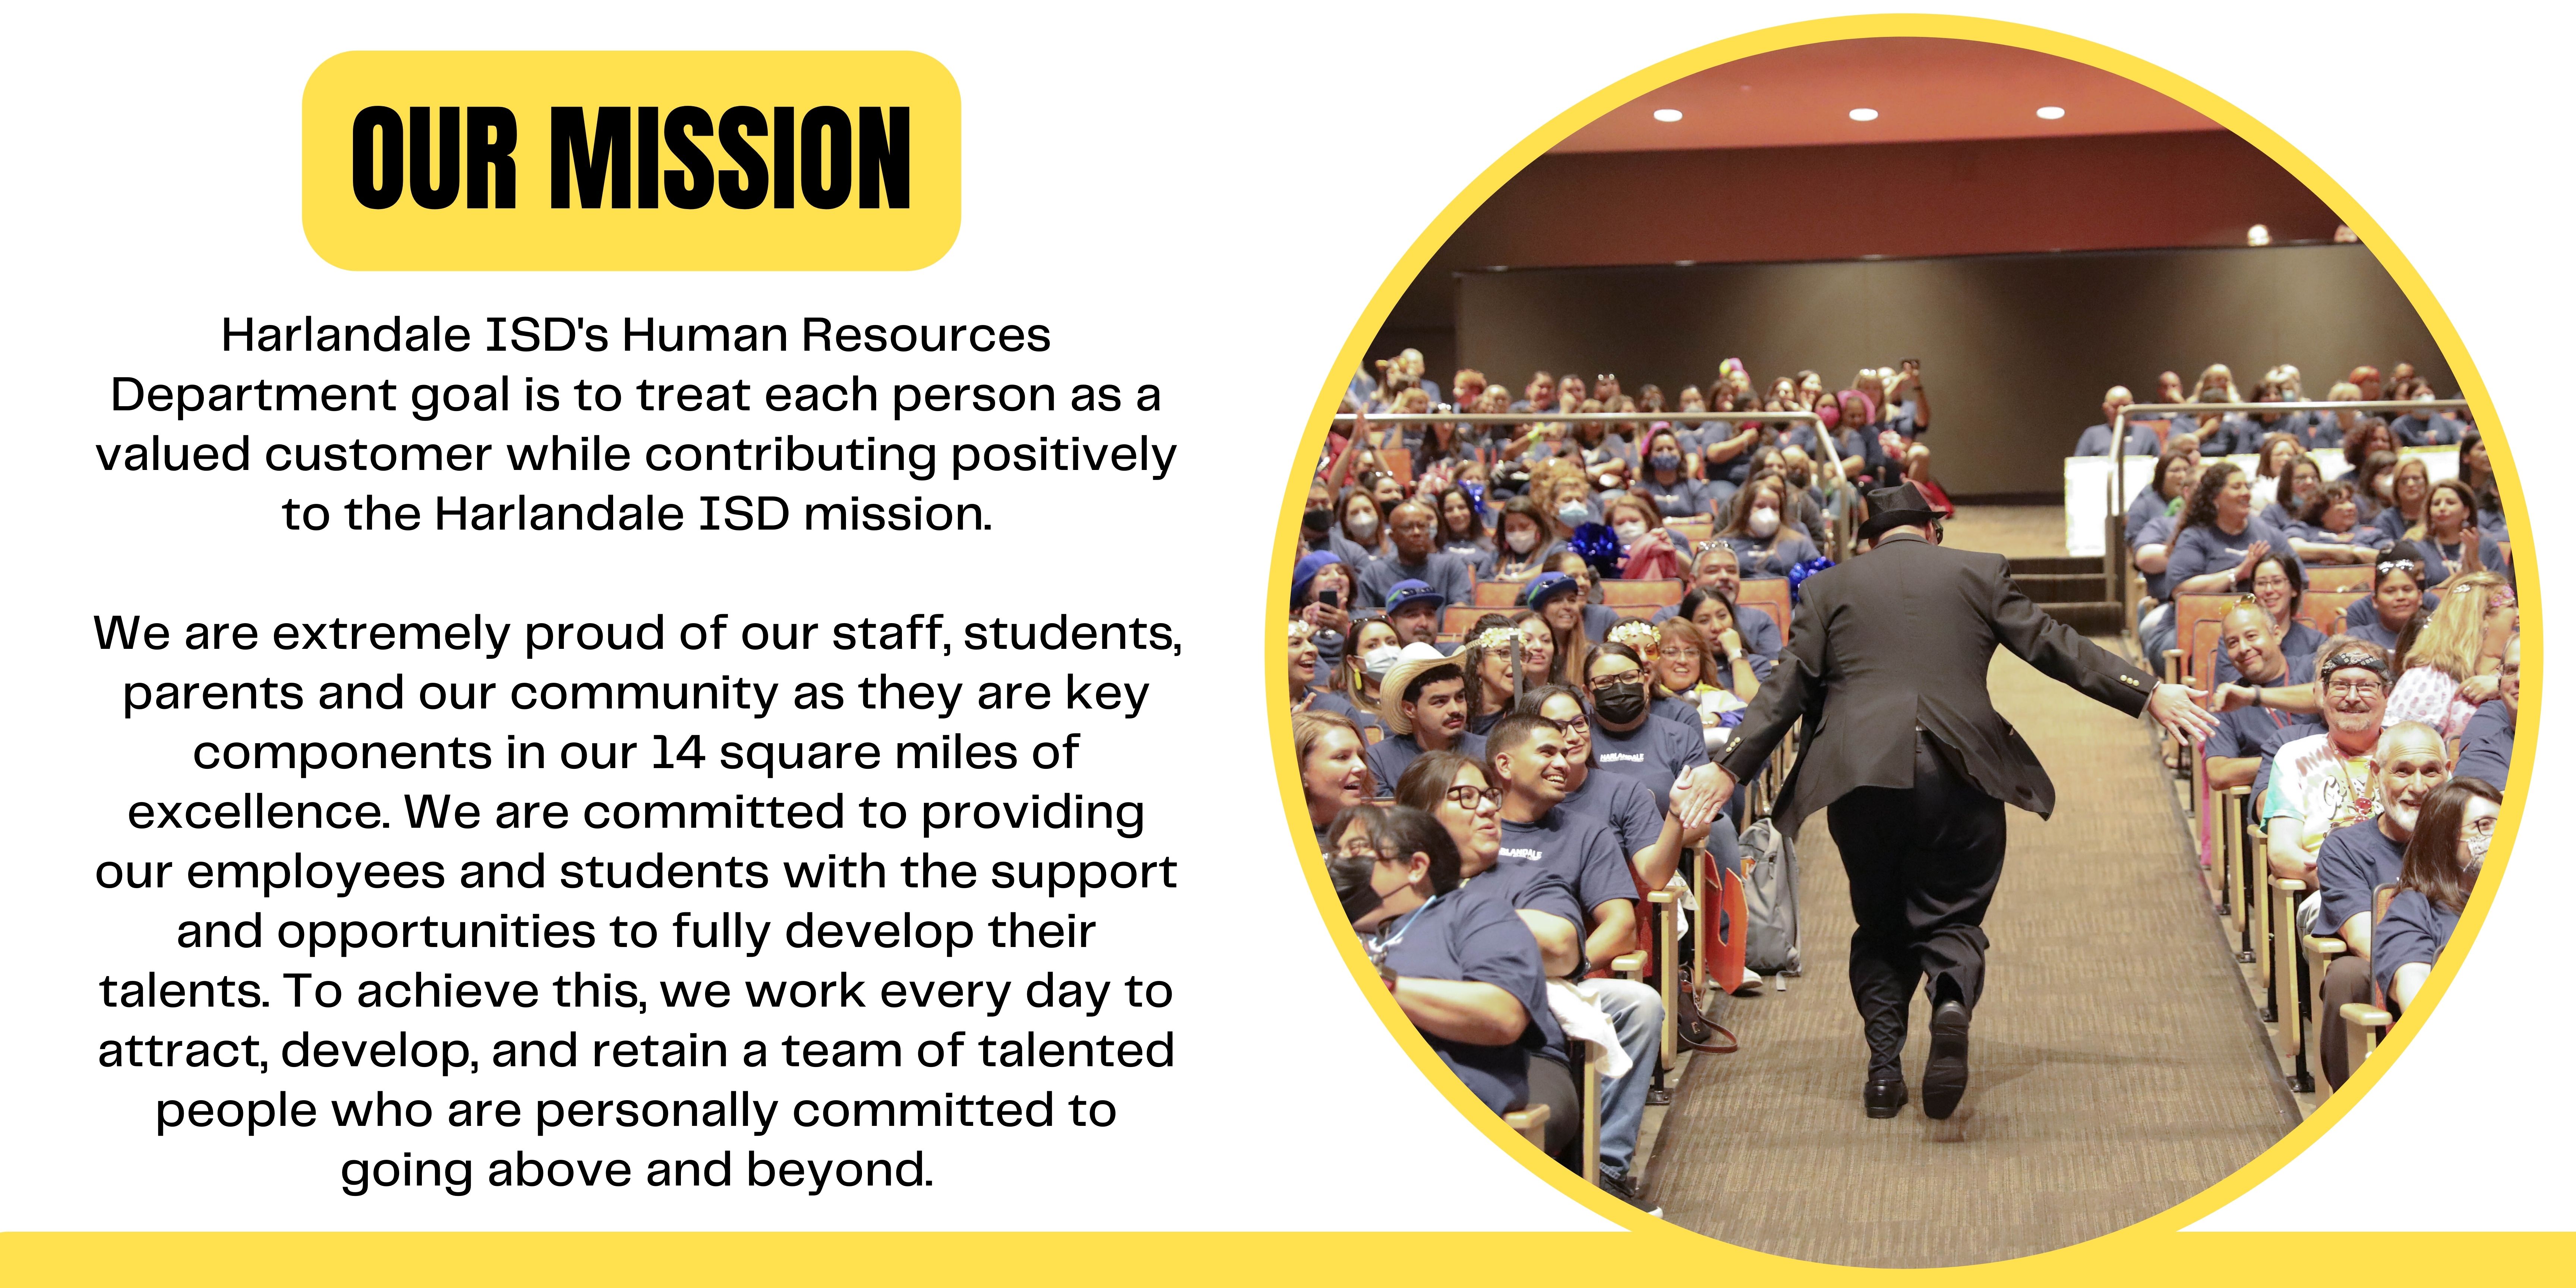 Our Mission: Harlandale ISD's Human Resources Department goal is to treat each person as a valued customer while contributing positively to the Harlandale ISD mission.  We are extremely proud of our staff, students, parents and our community as they are key components in our 14 square miles of excellence. We are committed to providing our employees and students with the support and opportunities to fully develop their talents. To achieve this, we work every day to attract, develop, and retain a team of talented people who are personally committed to going above and beyond.